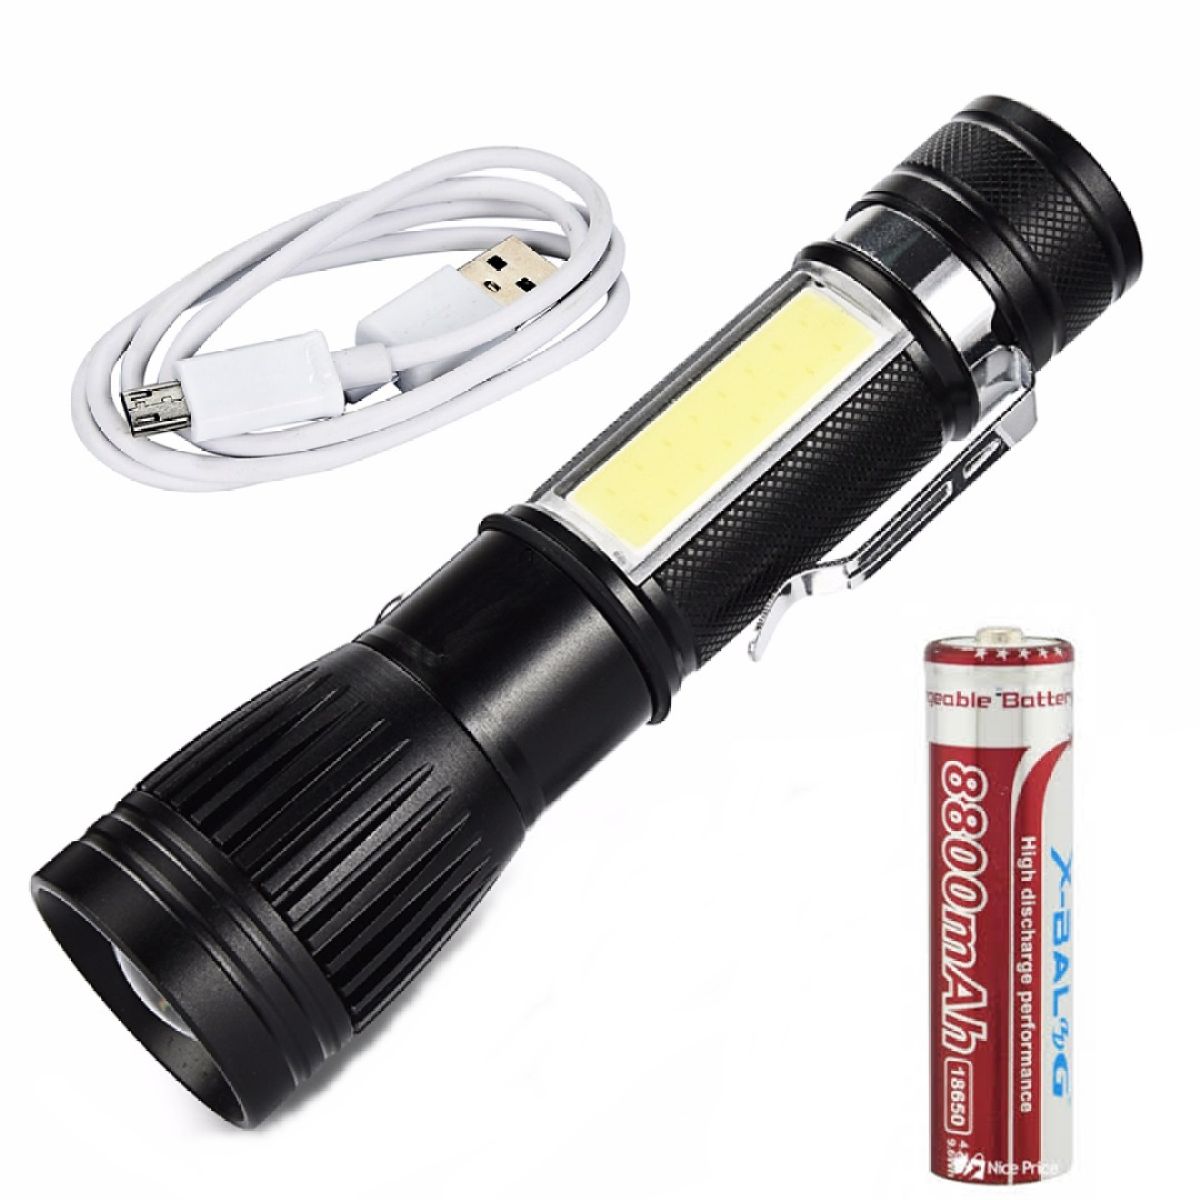 Rechargeable LED Powerful Flashlight Zoomable Pocket Torch - 545